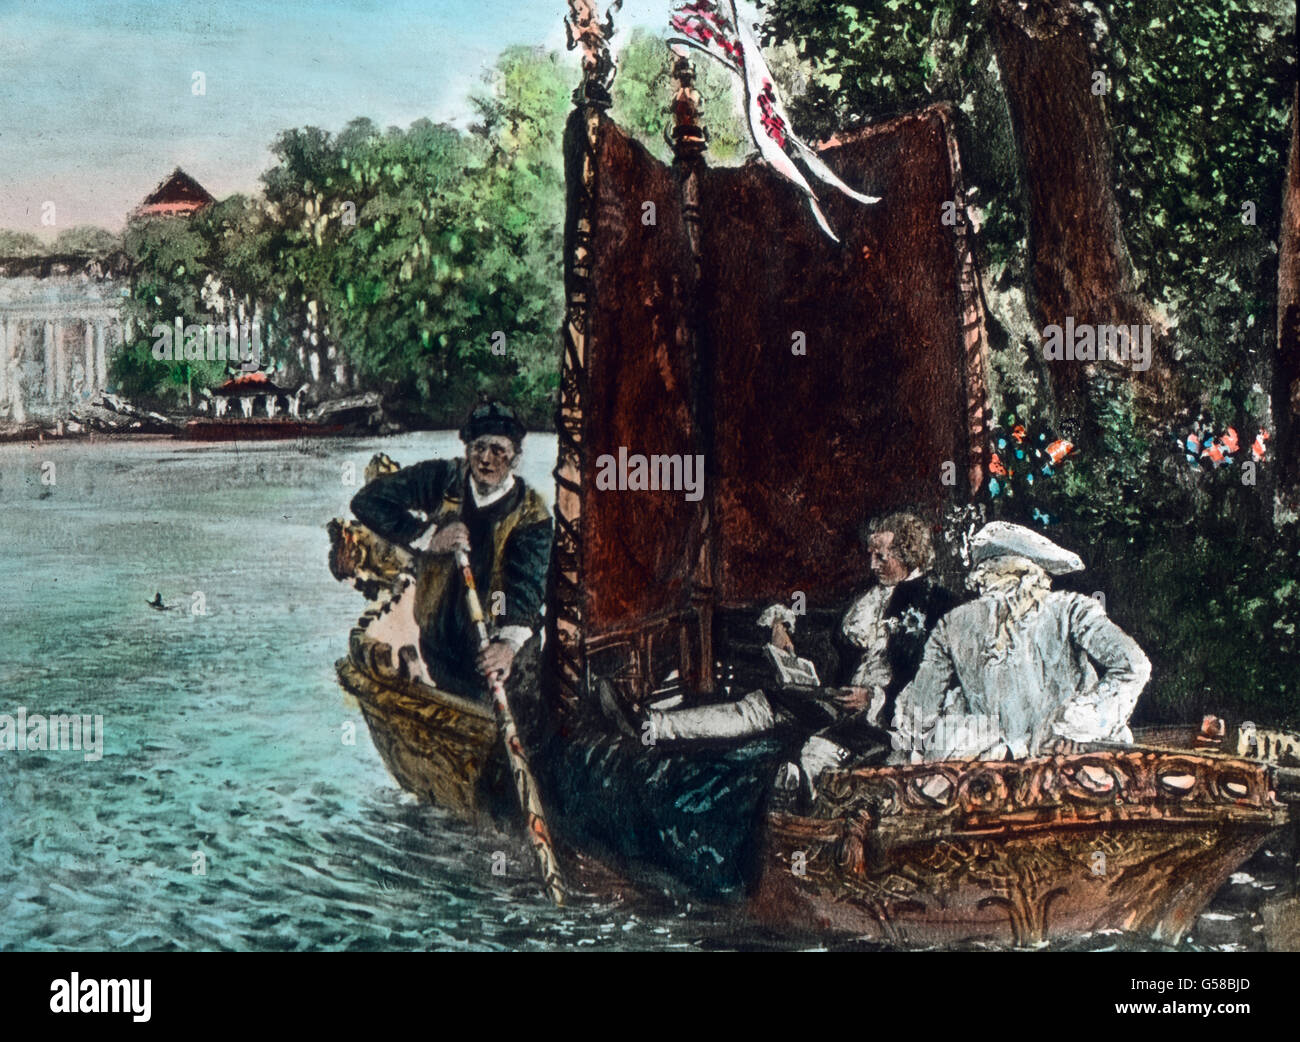 Friedrich der Große in Rheinsberg. Germany, Prussia, monarchy, king, royalty, nobility, 1900s, 20th century, archive, Carl Simon, history, historical, hand coloured glass slide, German, Prussian, king, rowing, boat, lake, Stock Photo